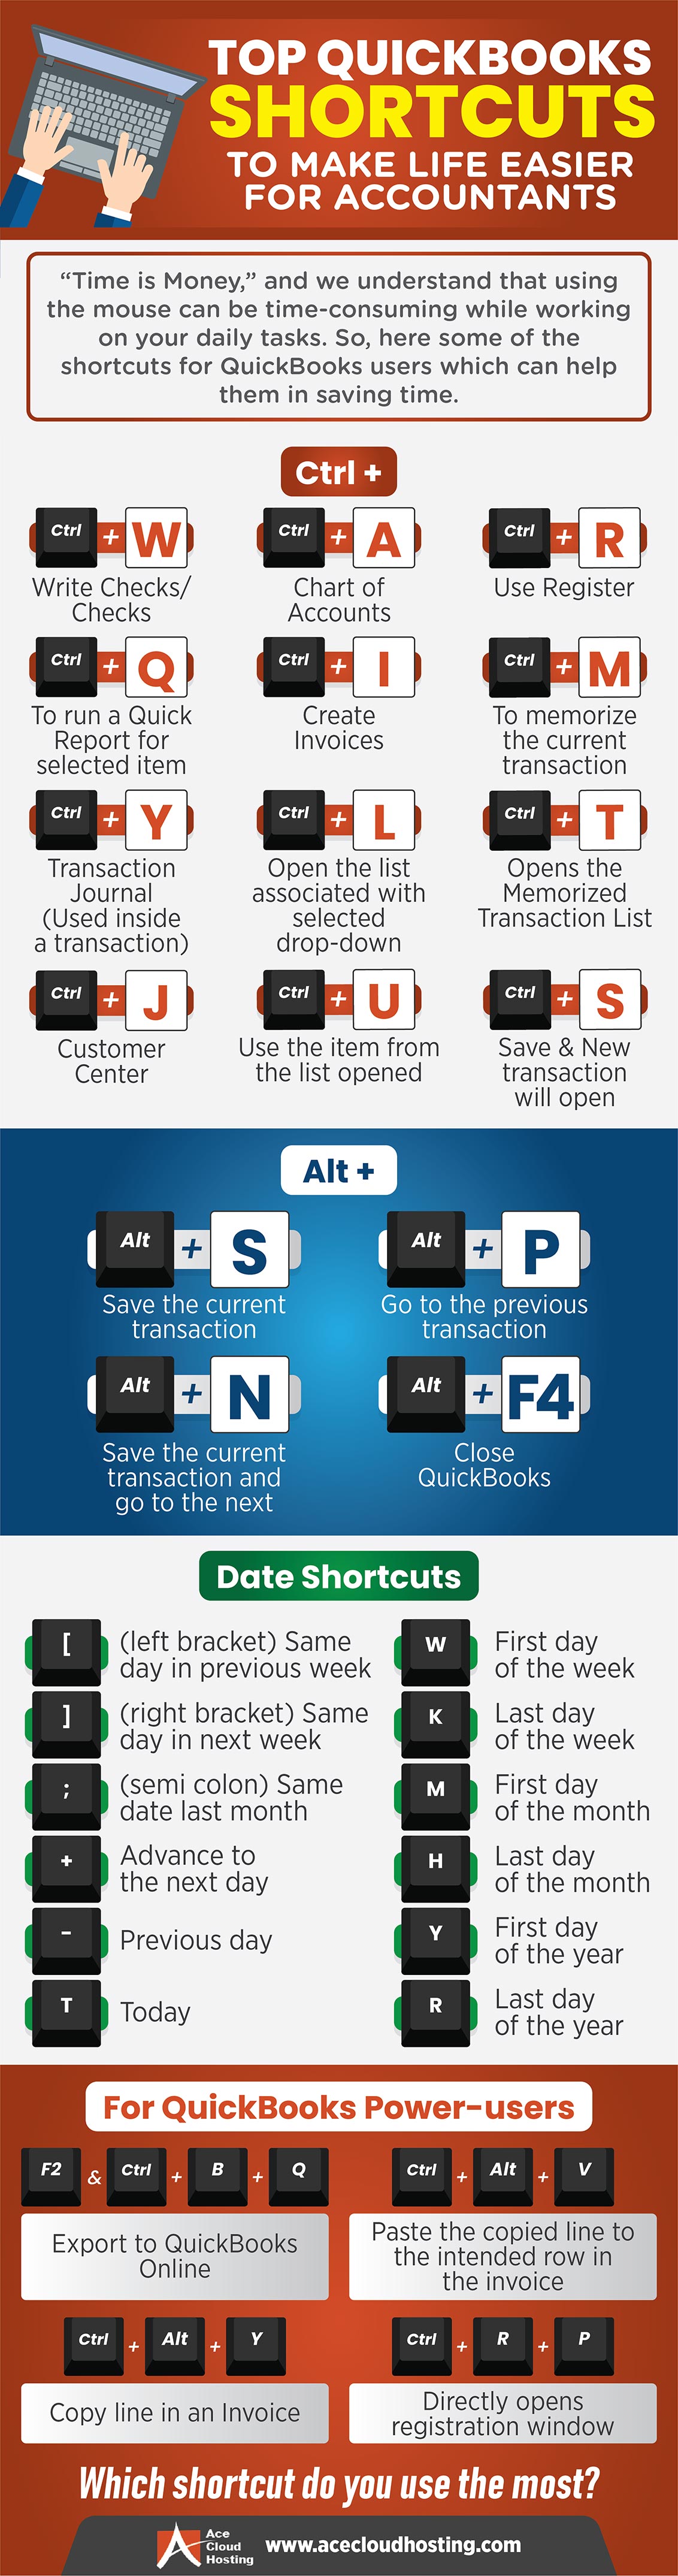 QuickBooks Shortcuts to Make Life Easier for Accountants Infographic